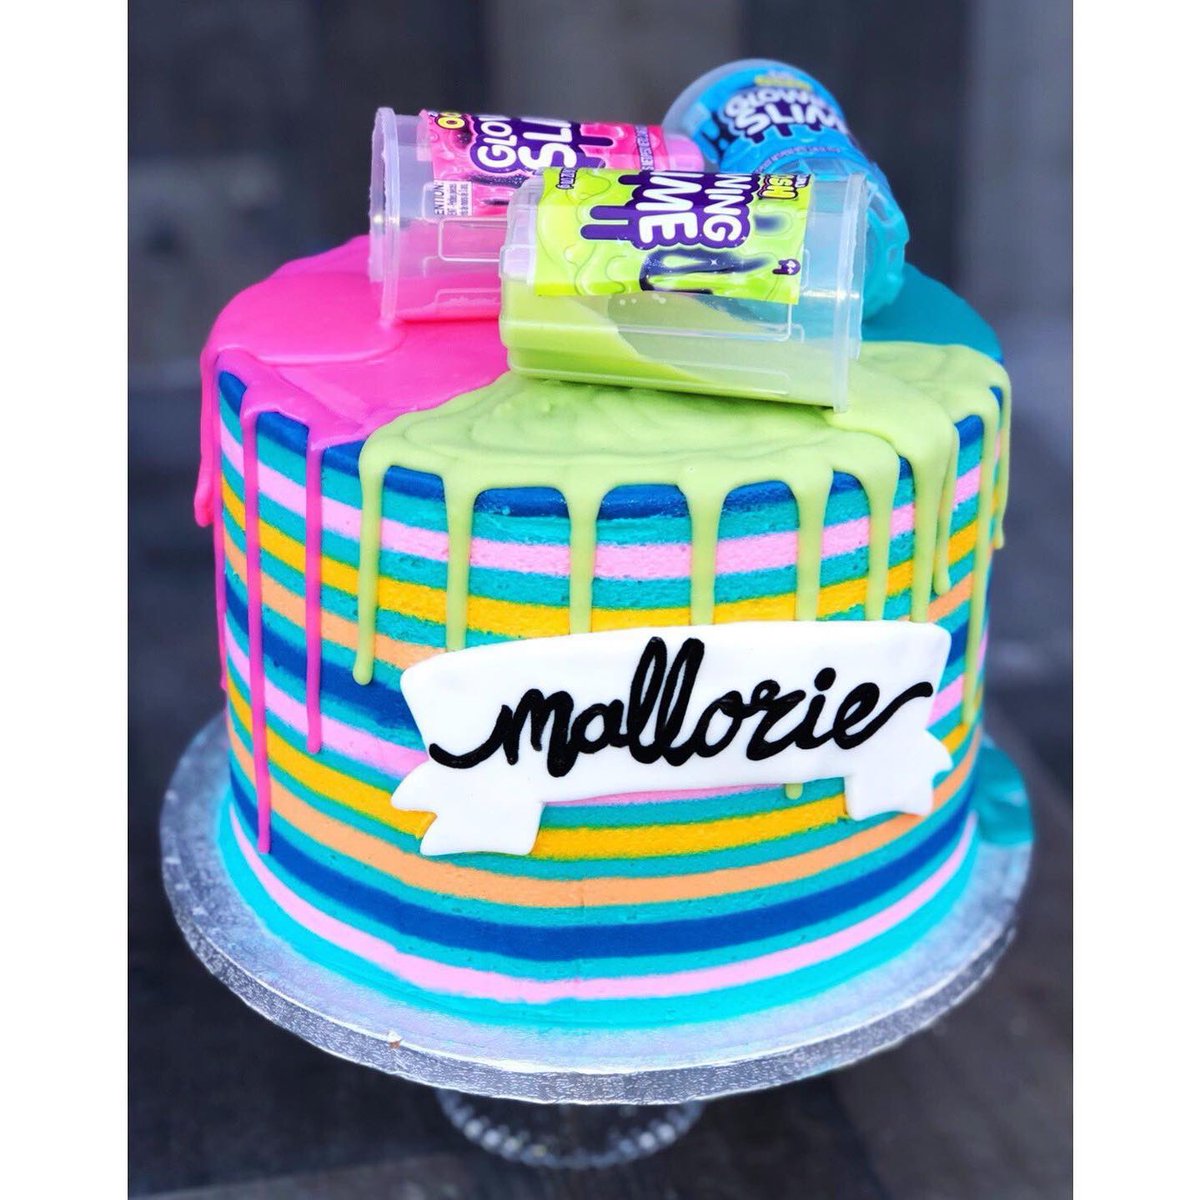 Cake Decorating Classes Knoxville Tn - Cake decorating ideas